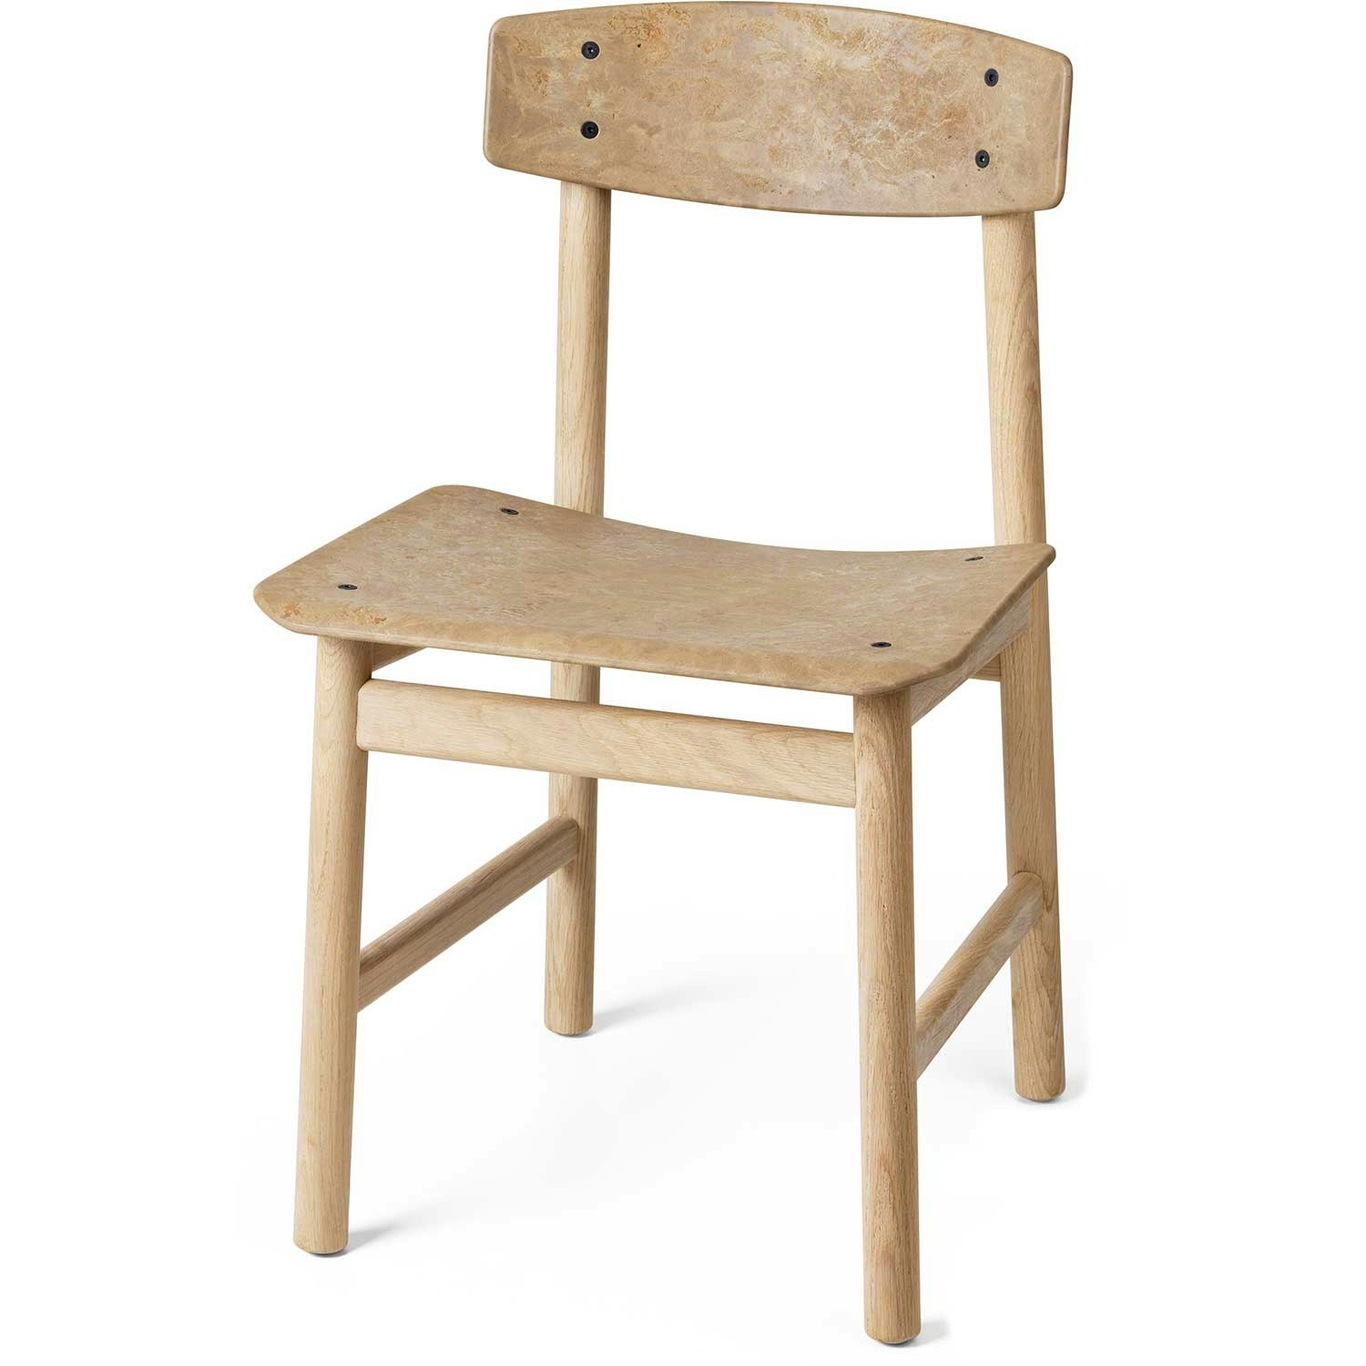 Conscious BM3162 Chair, Soaped Oak / Coffee Waste Light